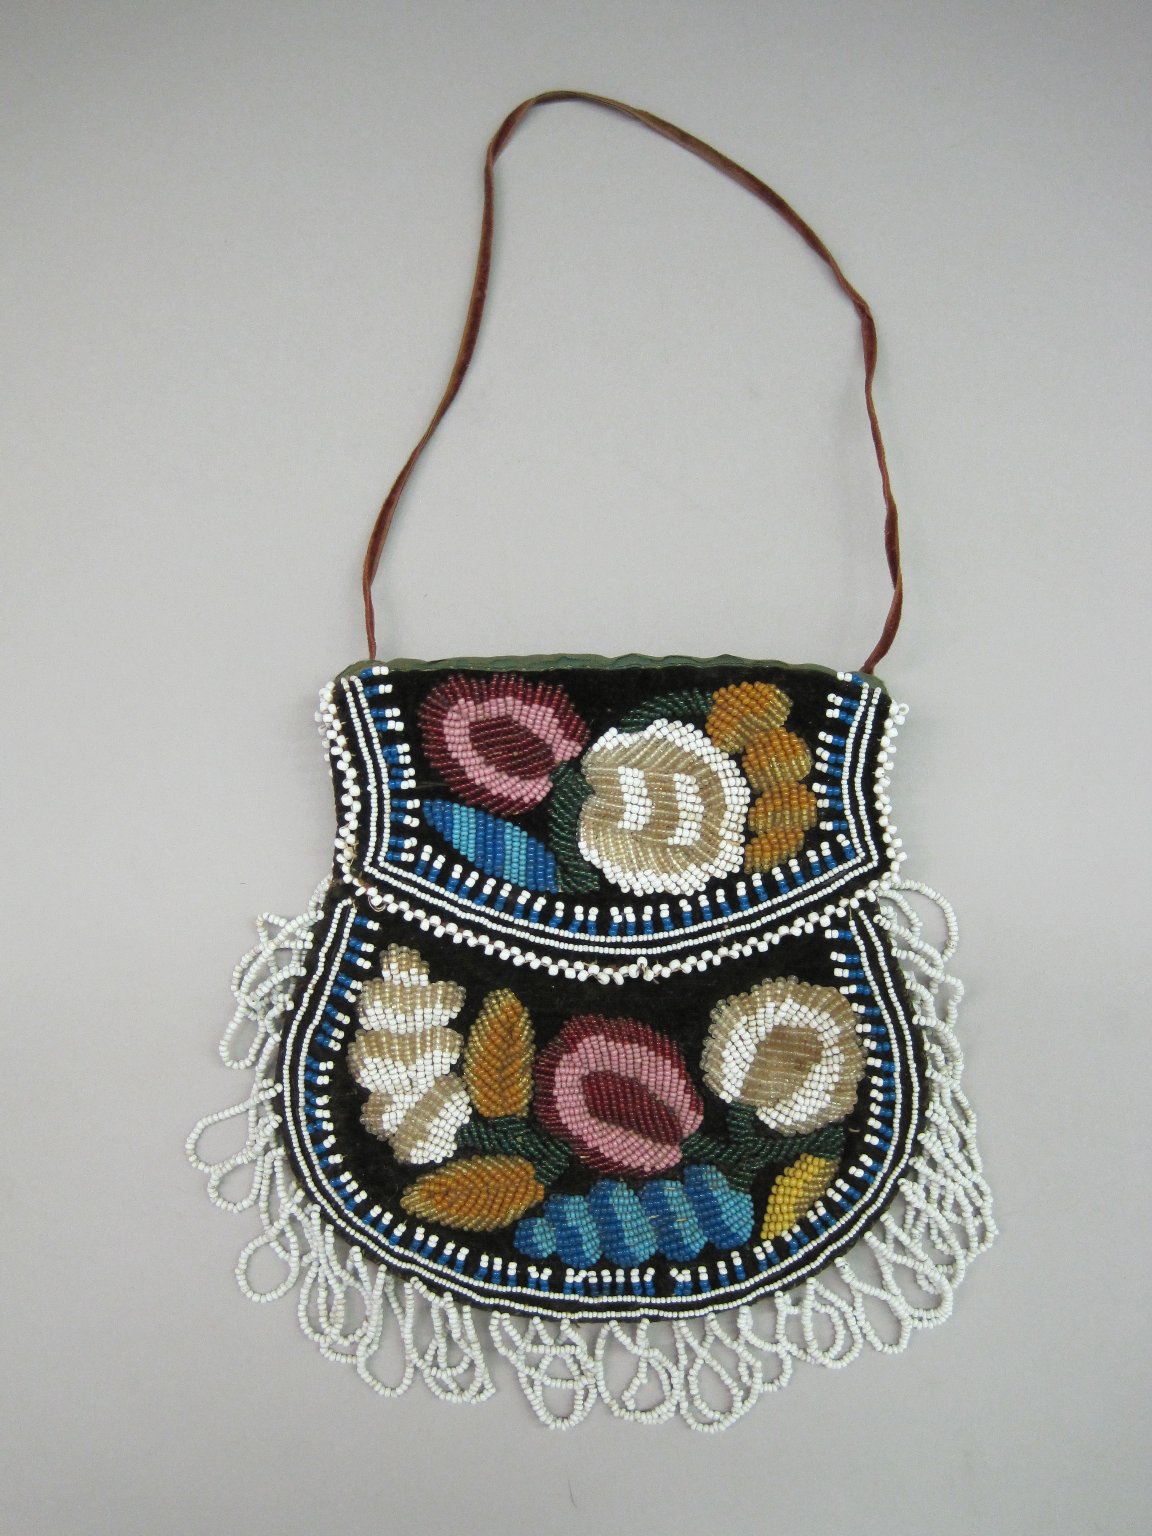 A History of The Beaded Bag